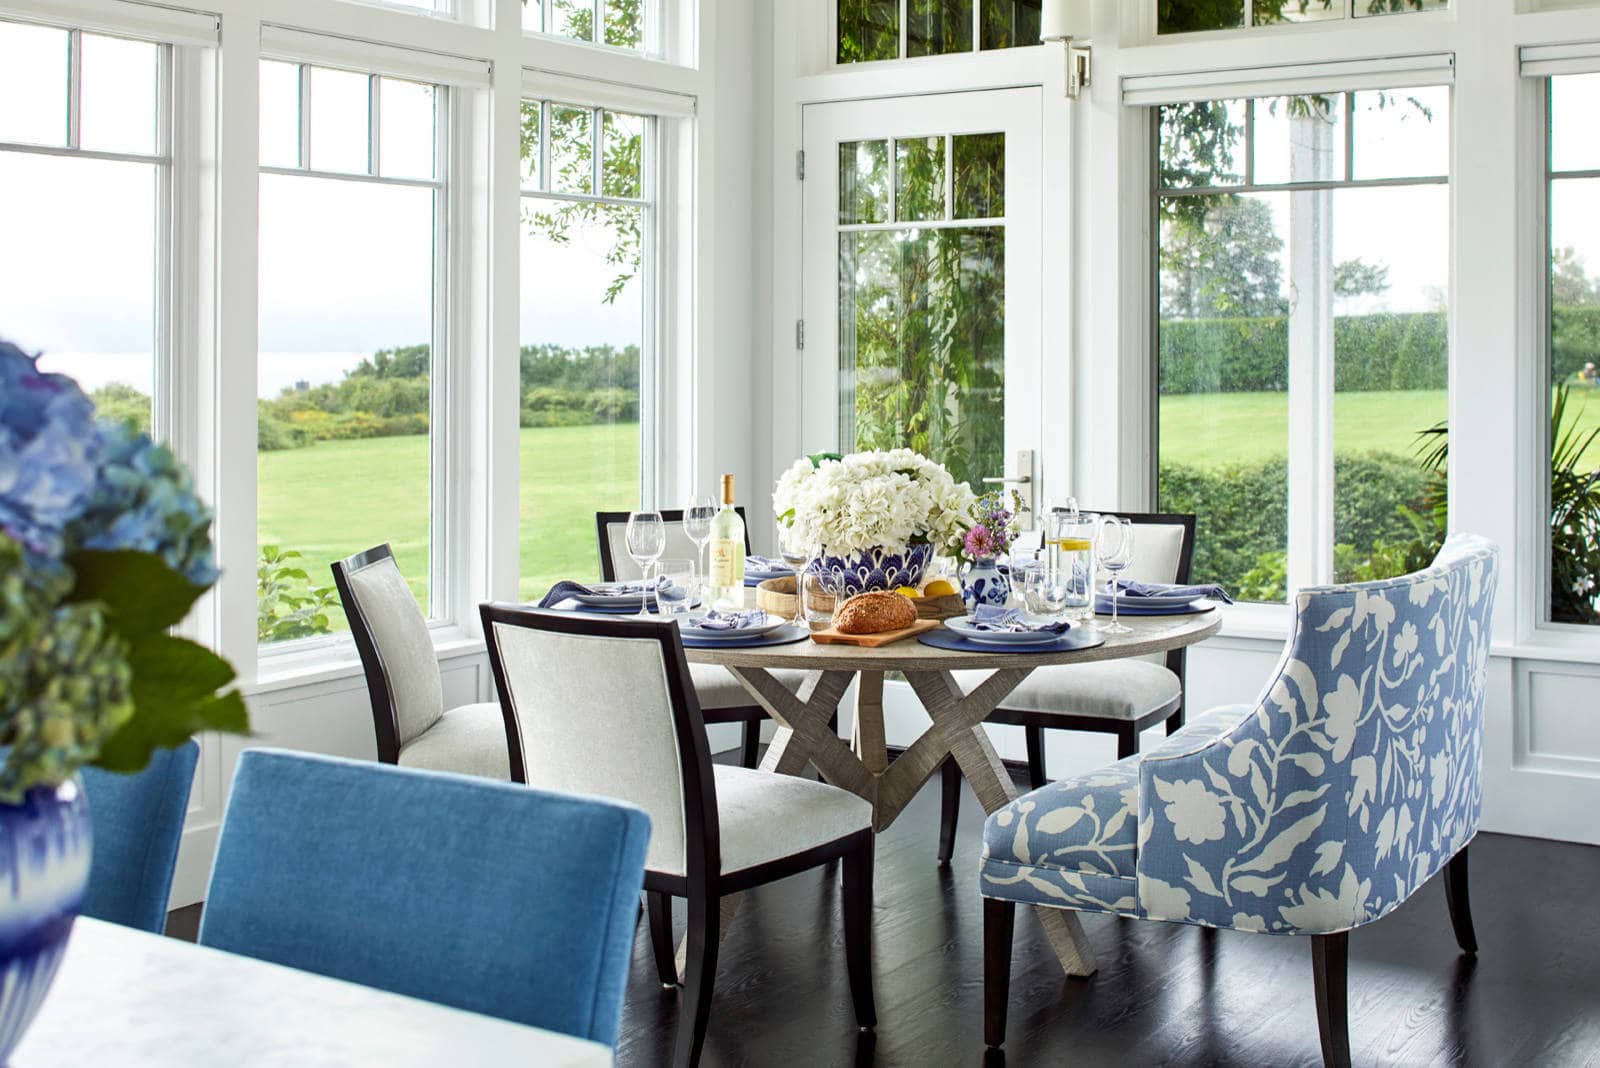 breakfast nook in coastal style home featuring round table and chairs